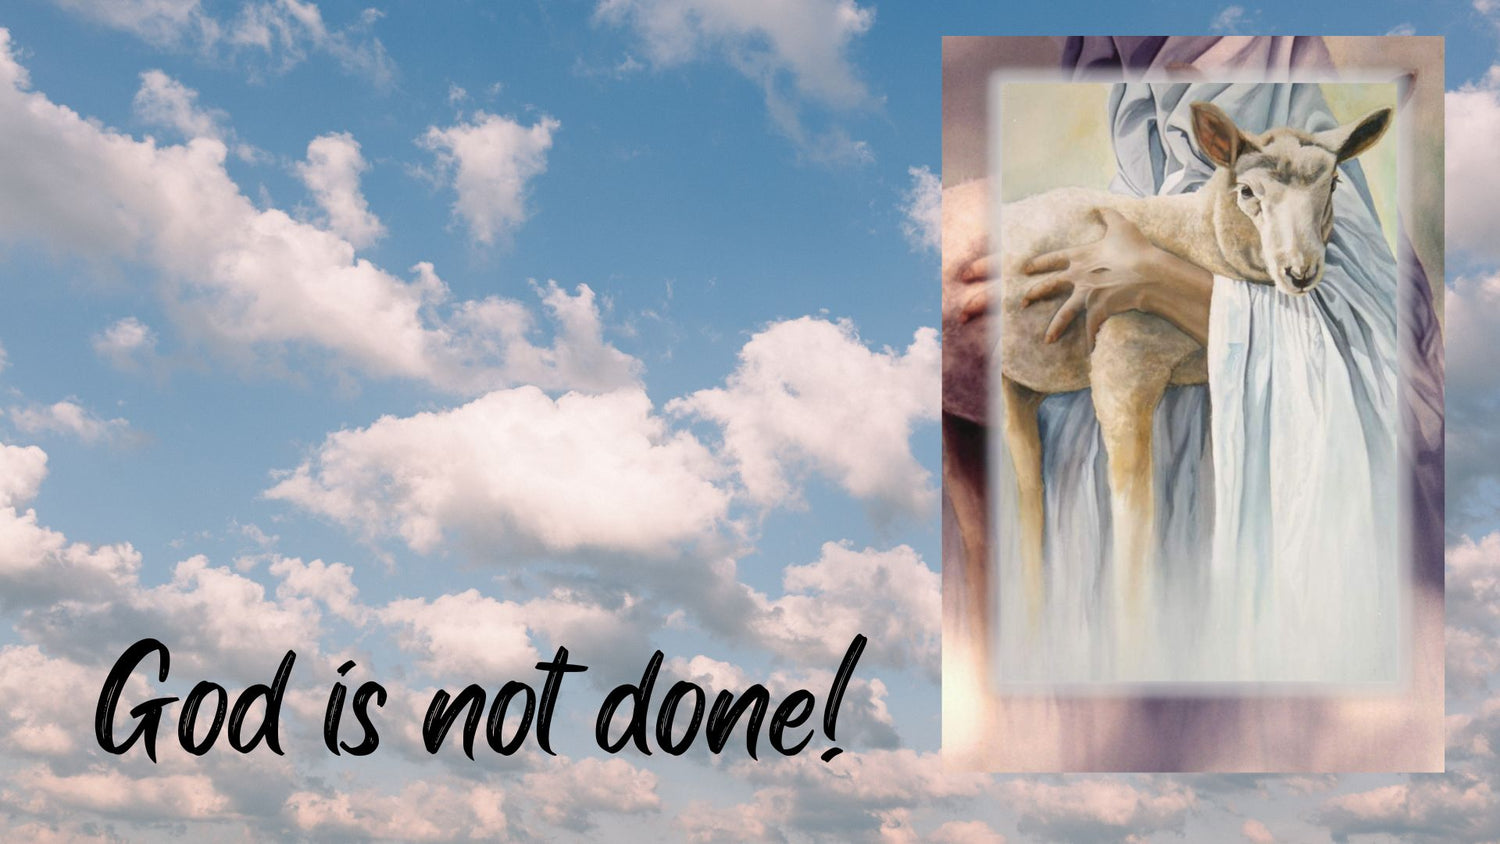 Mary Ellen tells the amazing and true story of the incredible event that happened after she painted 'The Good Shepherd'. This story is sure to encourage and uplift everyone in their walk of faith.